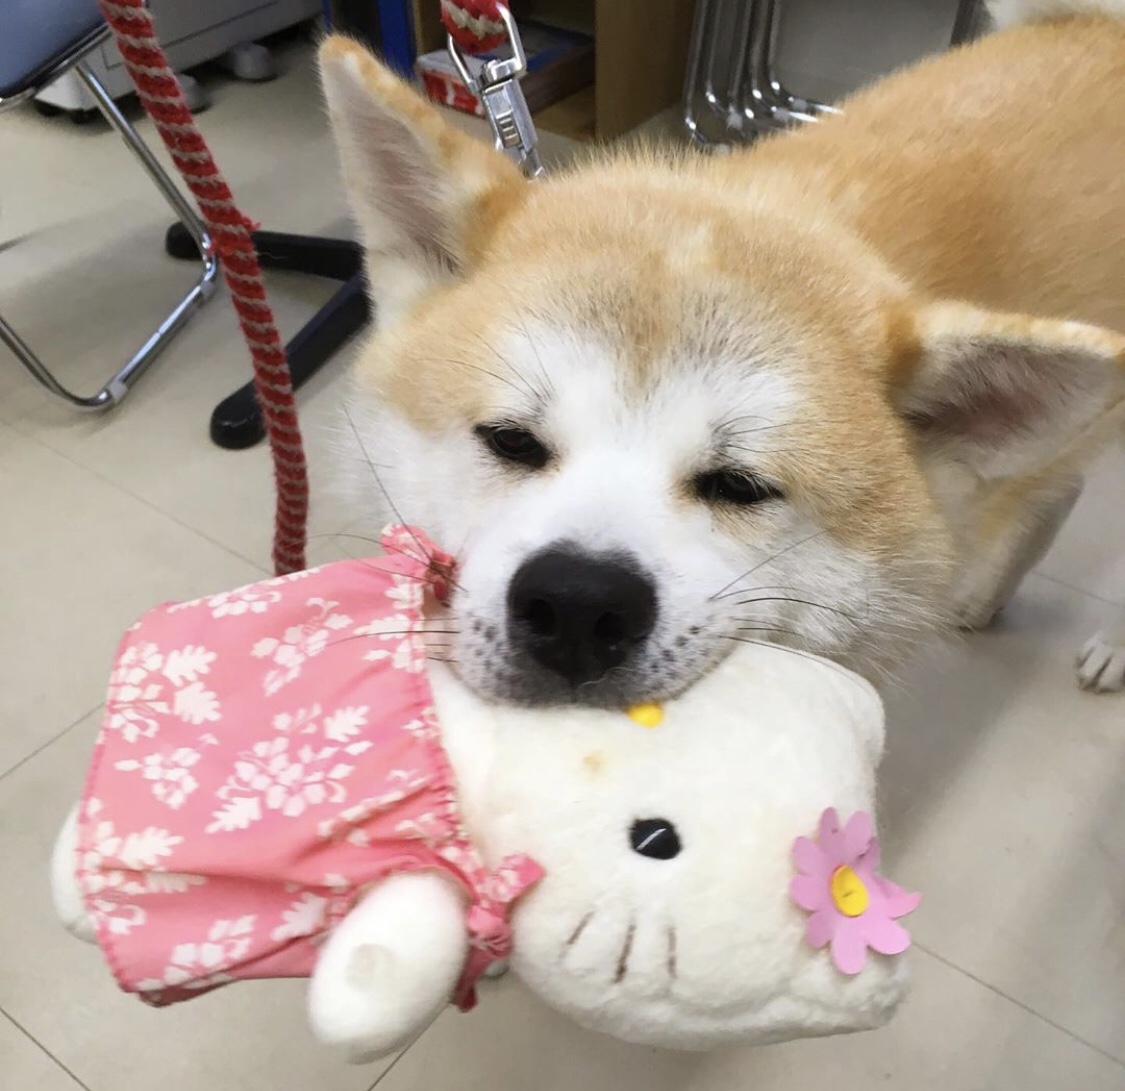 Akita Inu standing on the floor with a hello kitty stuffed toy in its mouth